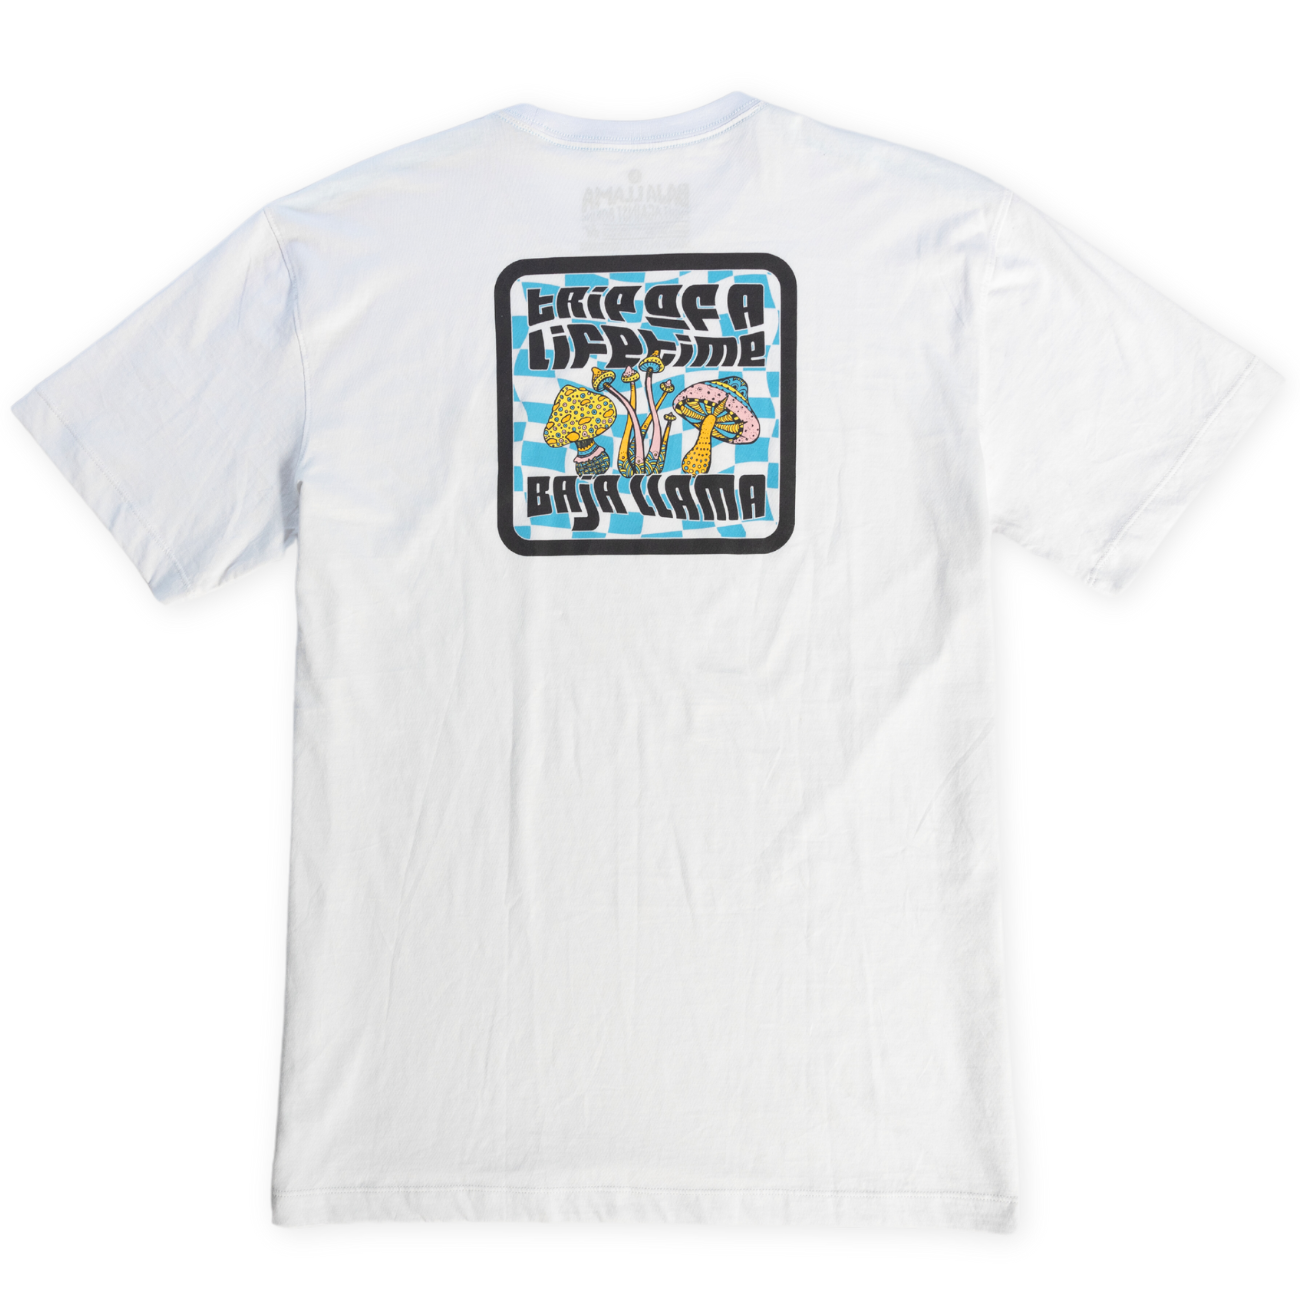 A TRIP OF A LIFETIME - WHITE PRIMO GRAPHIC TEE